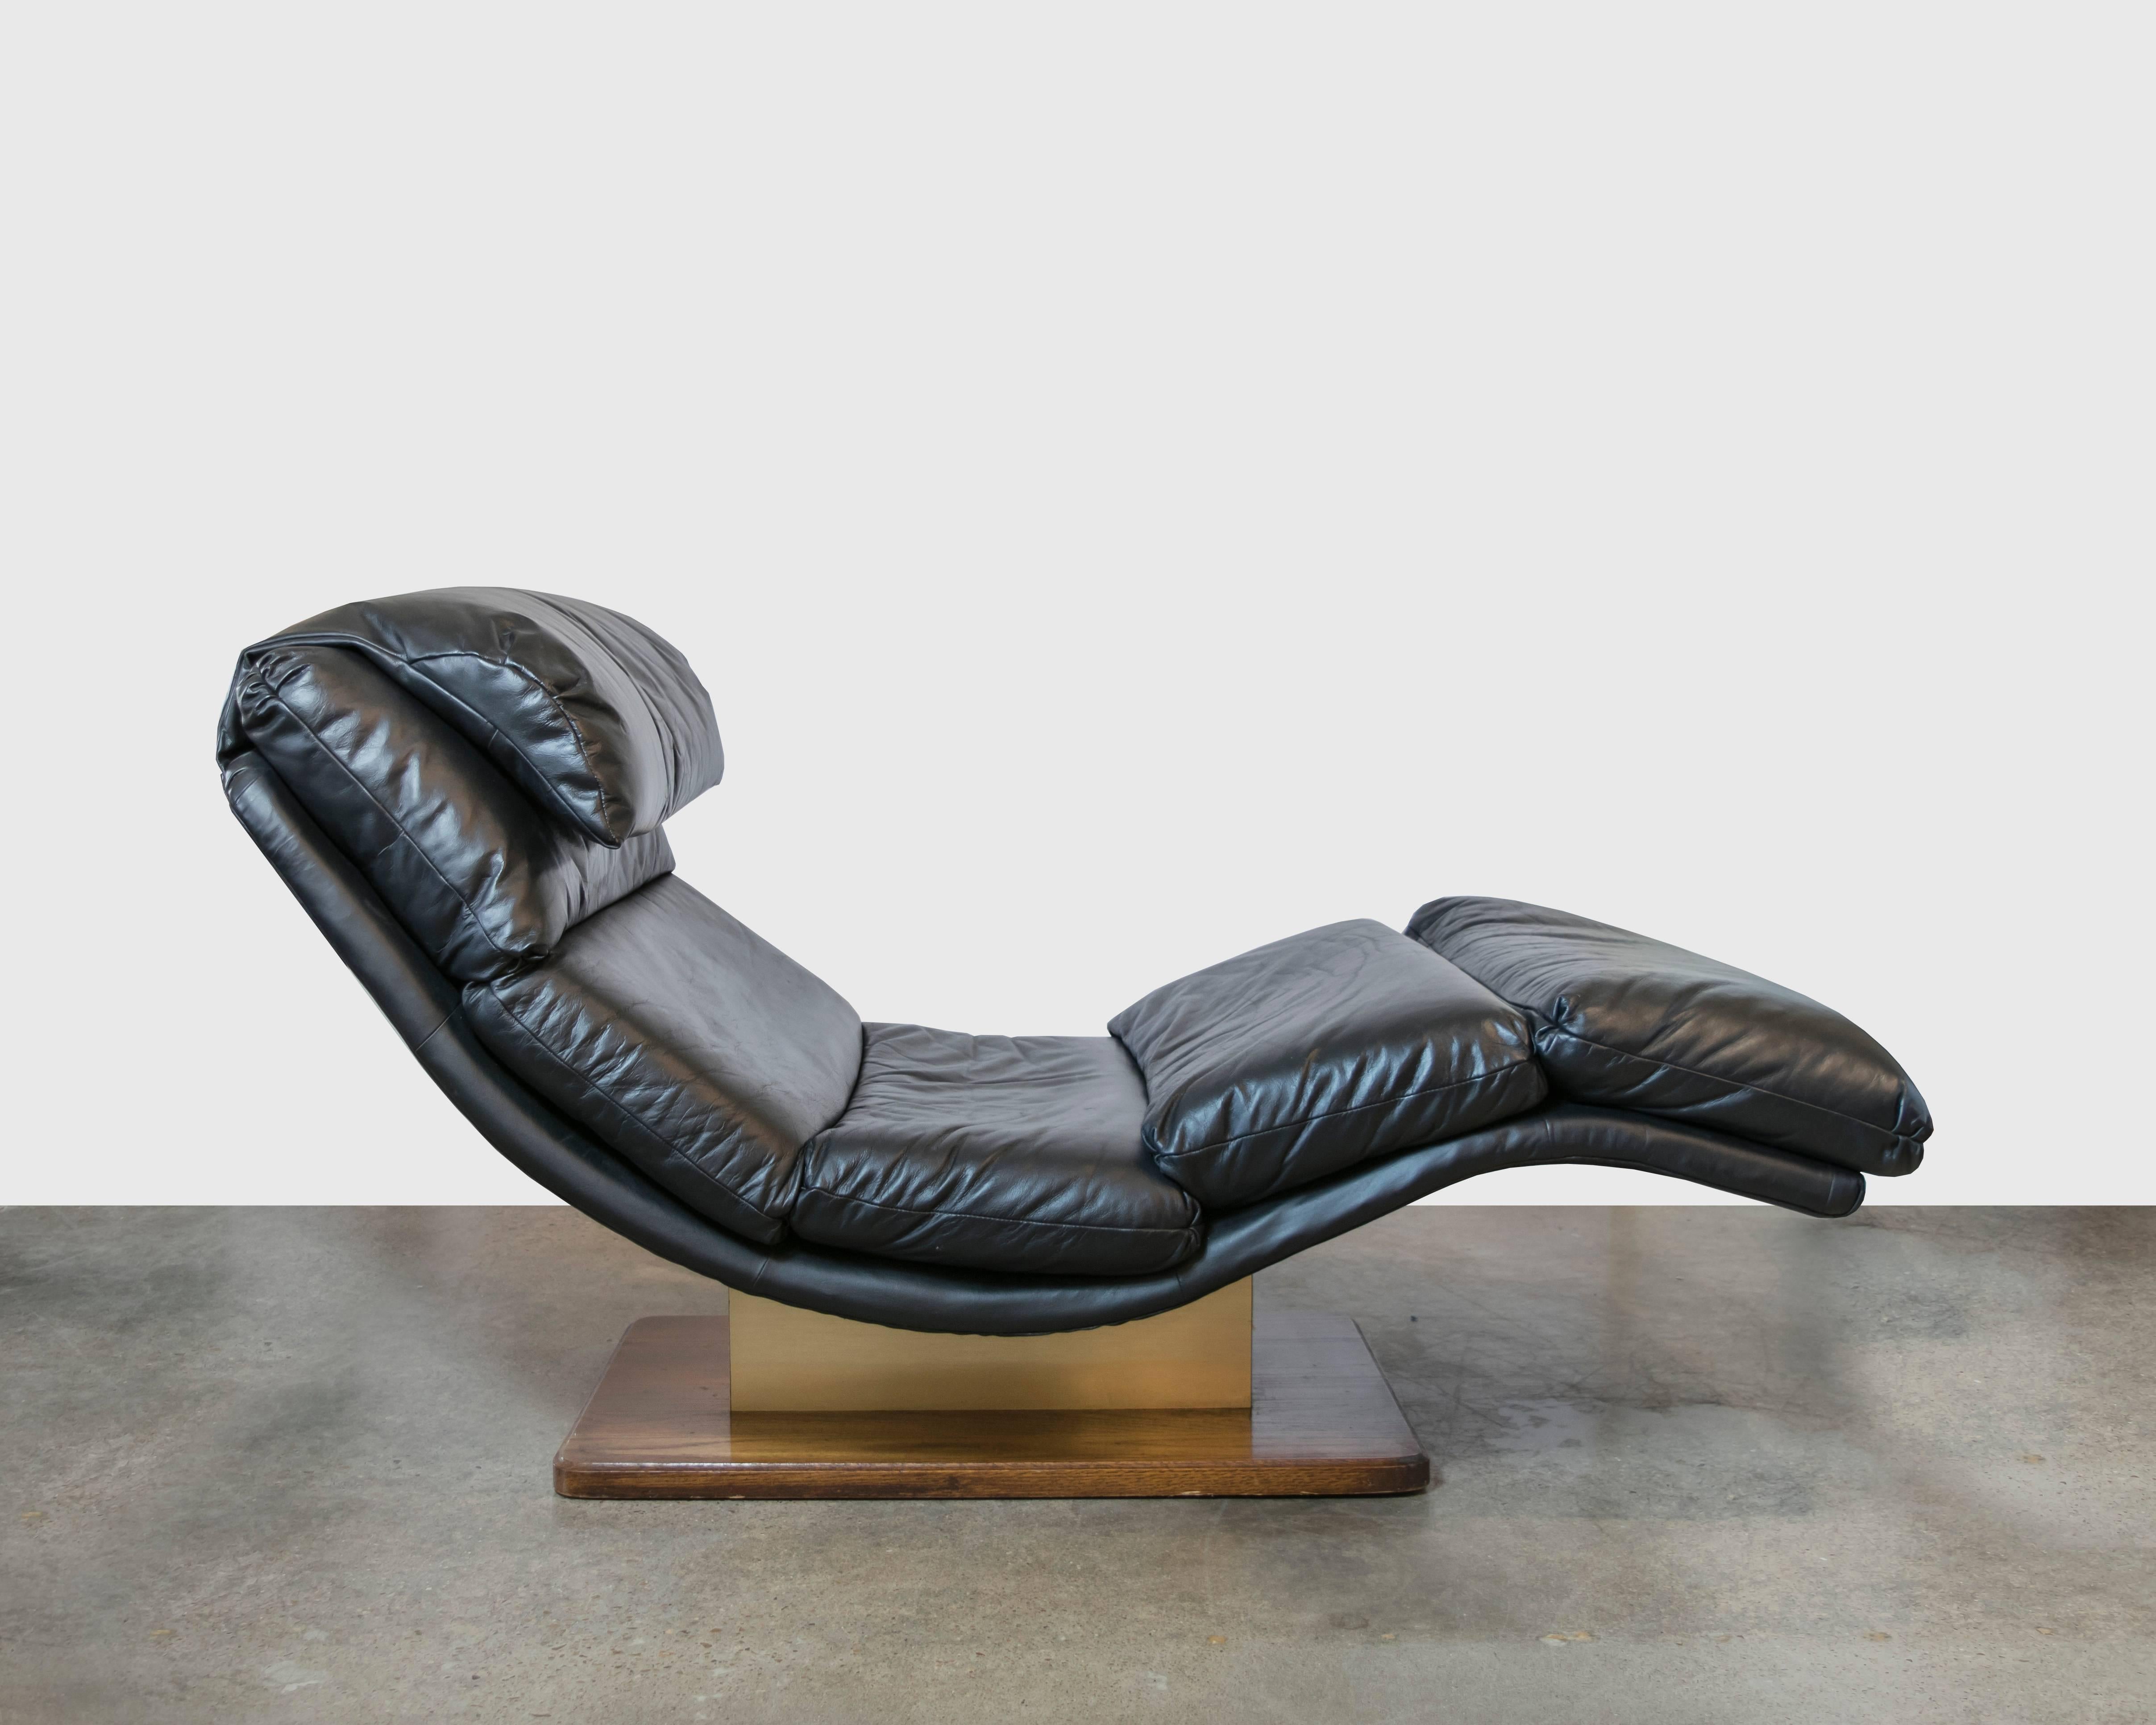 The best looking and most comfortable living room chaise for television watching or reading a good book. This wave shaped chaise sits on a wooden platform with a metallic column holding the chair up. Covered in distressed black leather.